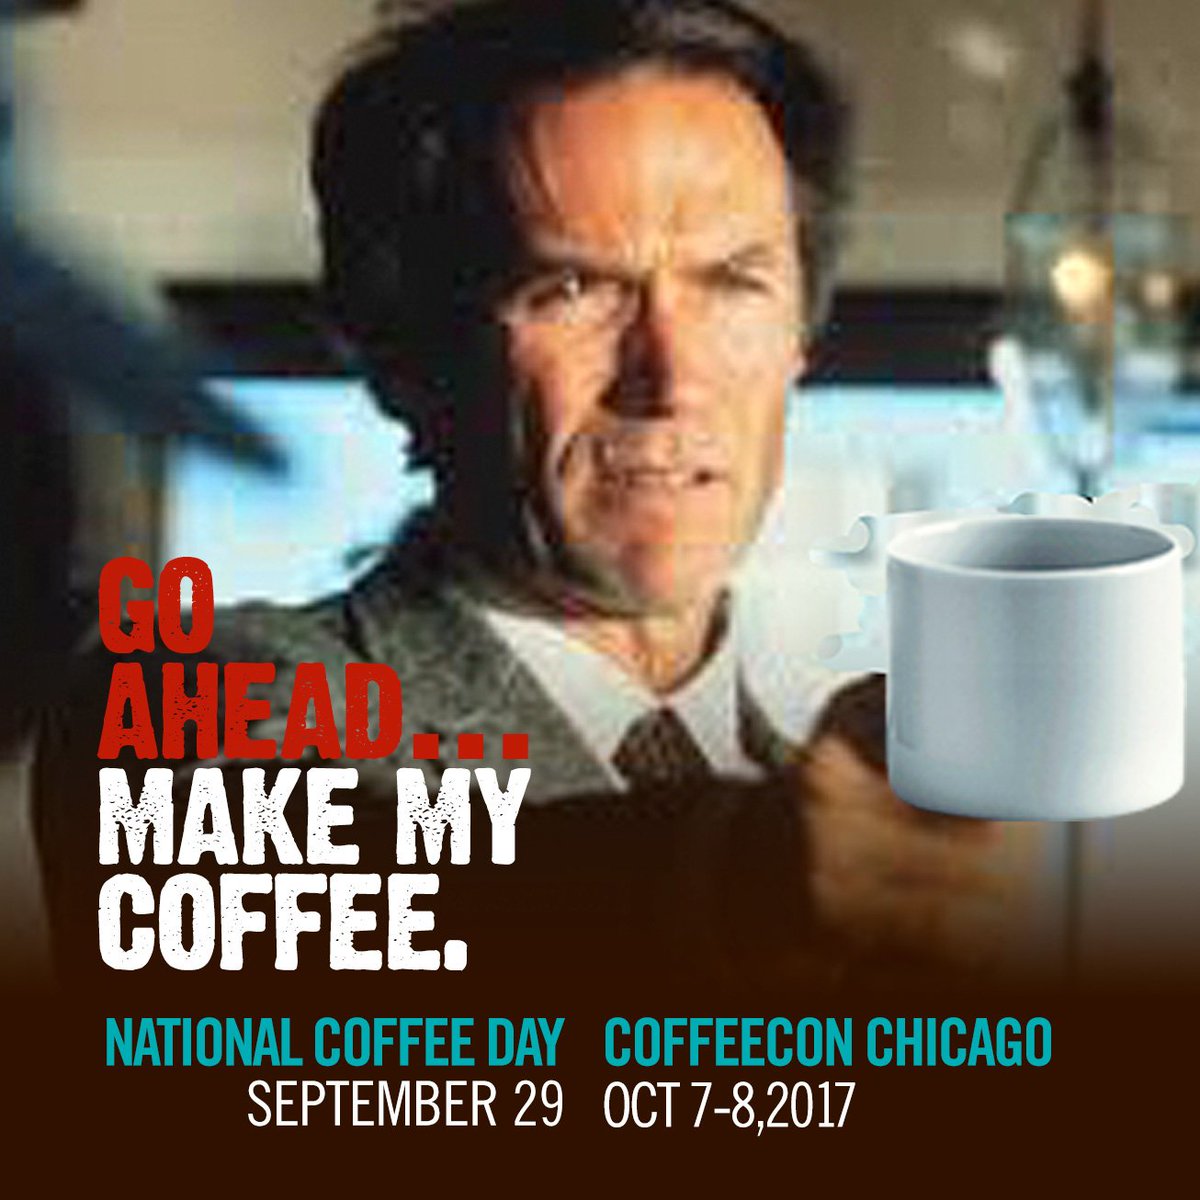 Be kind to your barista. Make their day #NationalCoffeeDay #CoffeeConChicago coming Oct 7&8 ow.ly/dH7Q30fvyvI